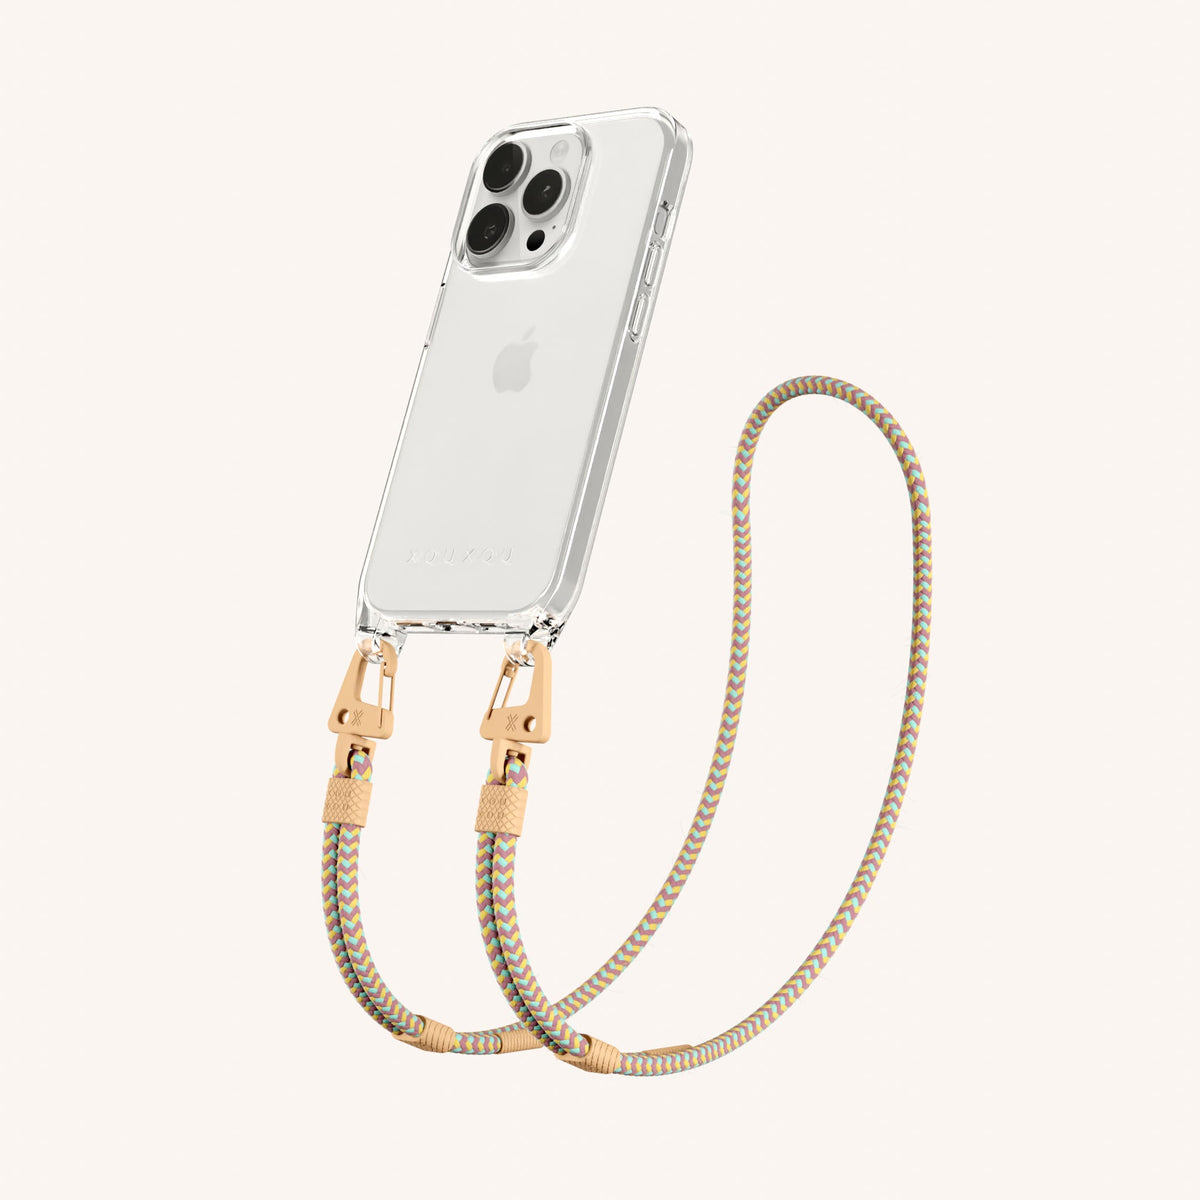 Clear Phone Necklace with Carabiner Rope for iPhone 15 Pro without MagSafe in Clear + Palm Springs Perspective View | XOUXOU #phone model_iphone 15 pro